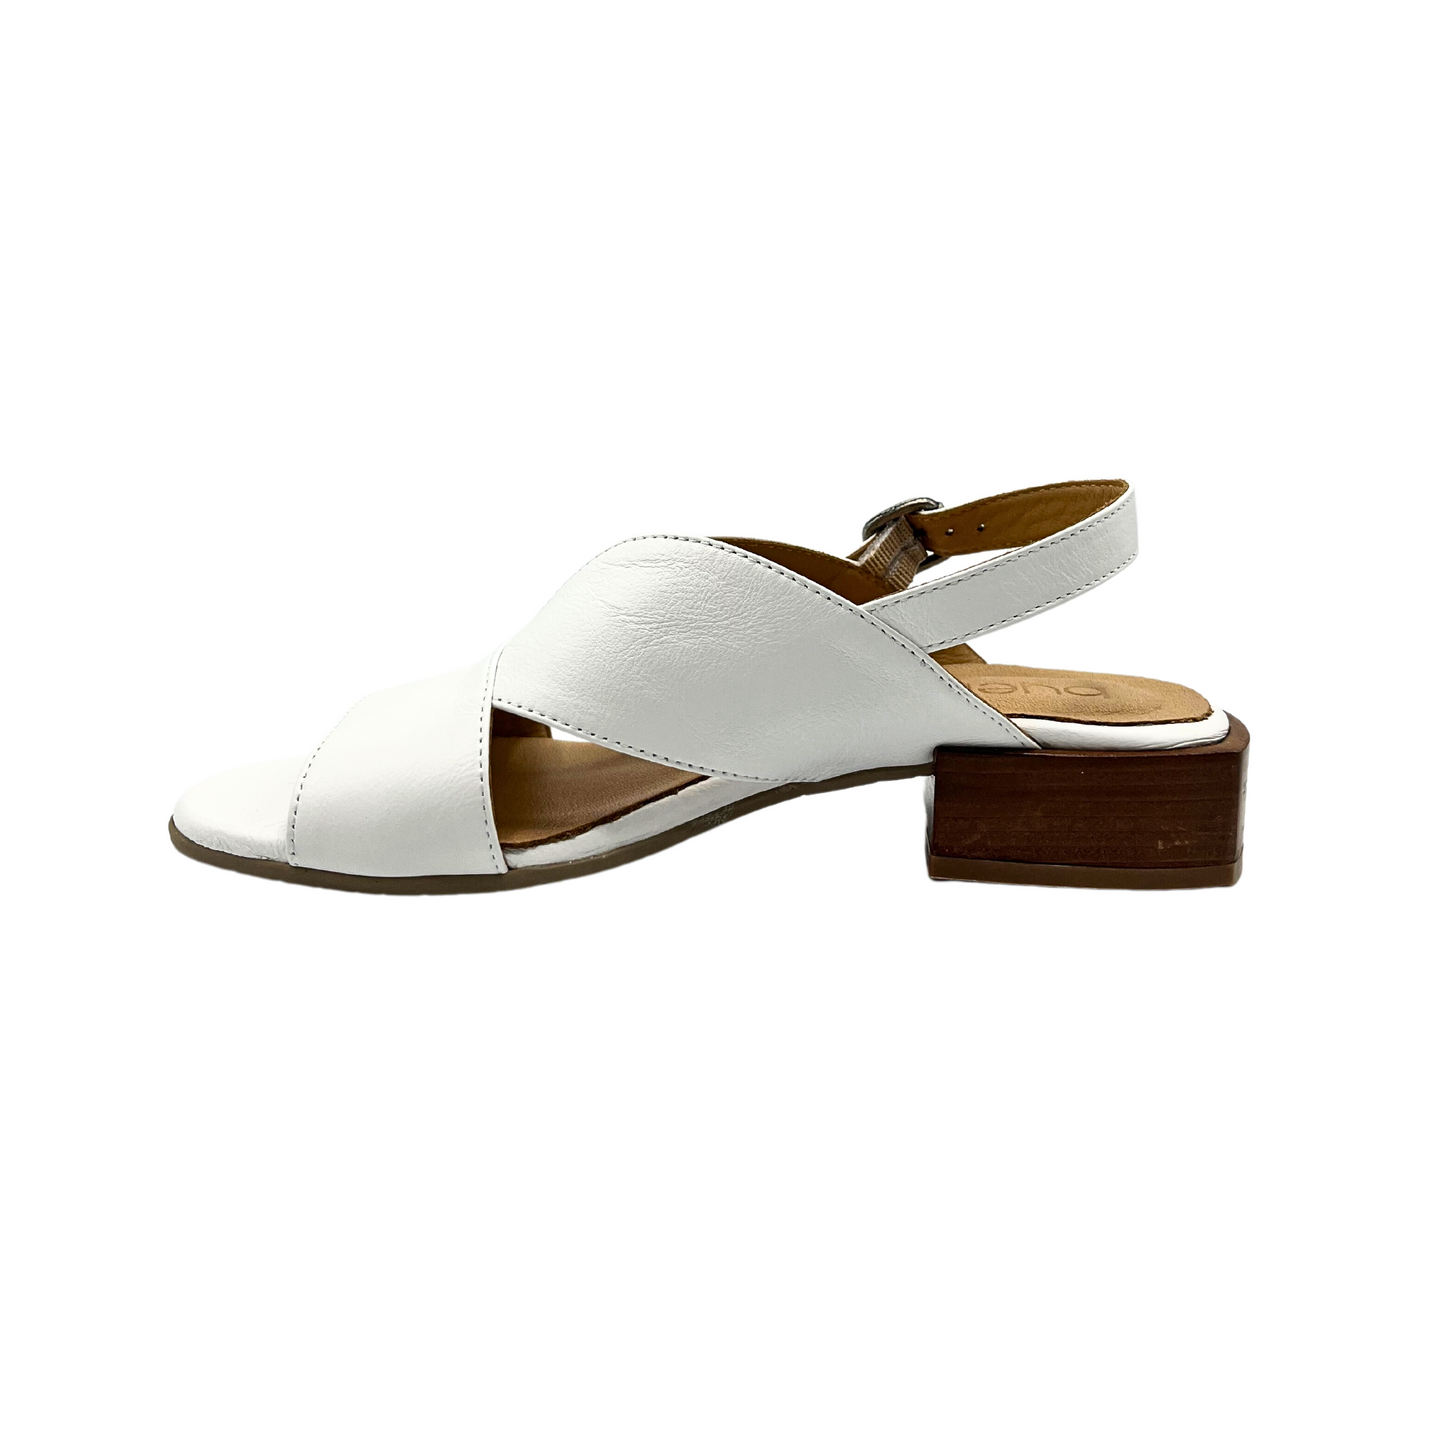 Inside view of white sandal.  Low block heel, open on both sides through the mid foot, adjustable strap at heel